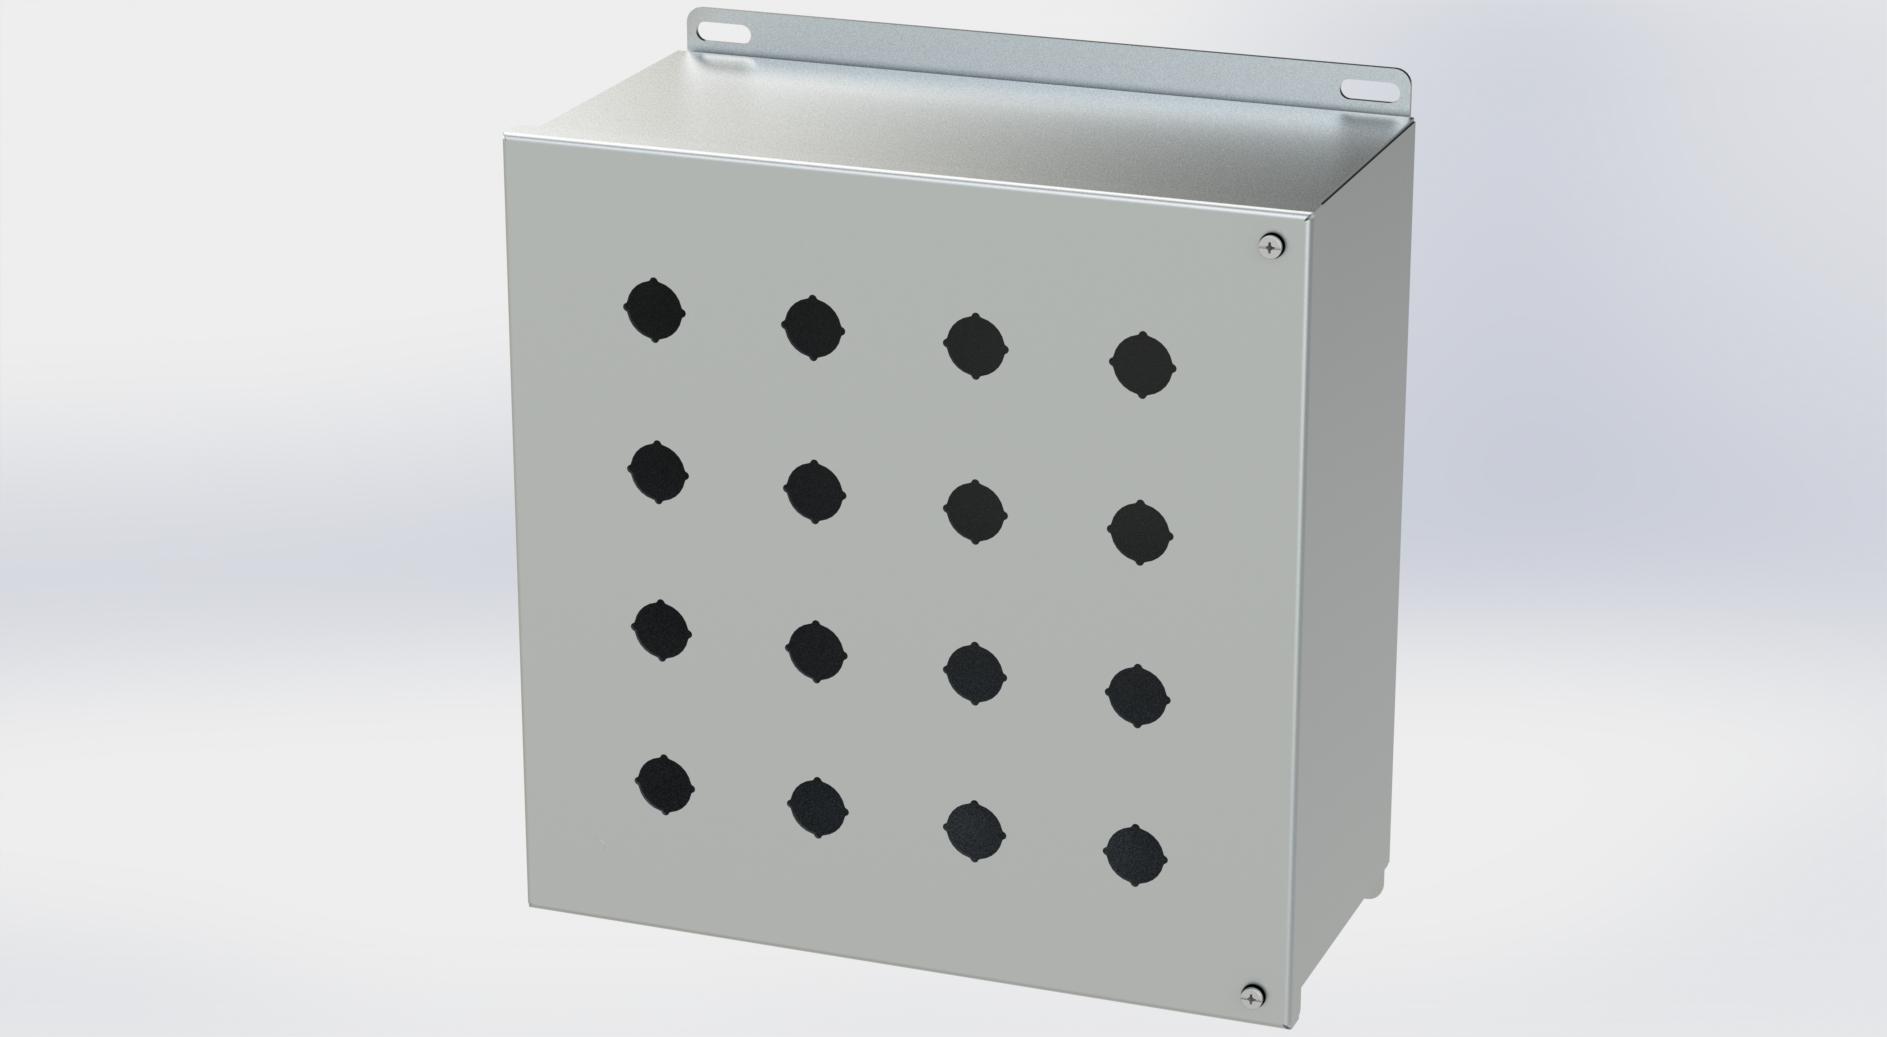 Saginaw Control SCE-16PBHSS6I S.S. PB Enclosure, Height:12.13", Width:12.00", Depth:6.00", #4 brushed finish on all exterior surfaces. Optional sub-panels are powder coated white.